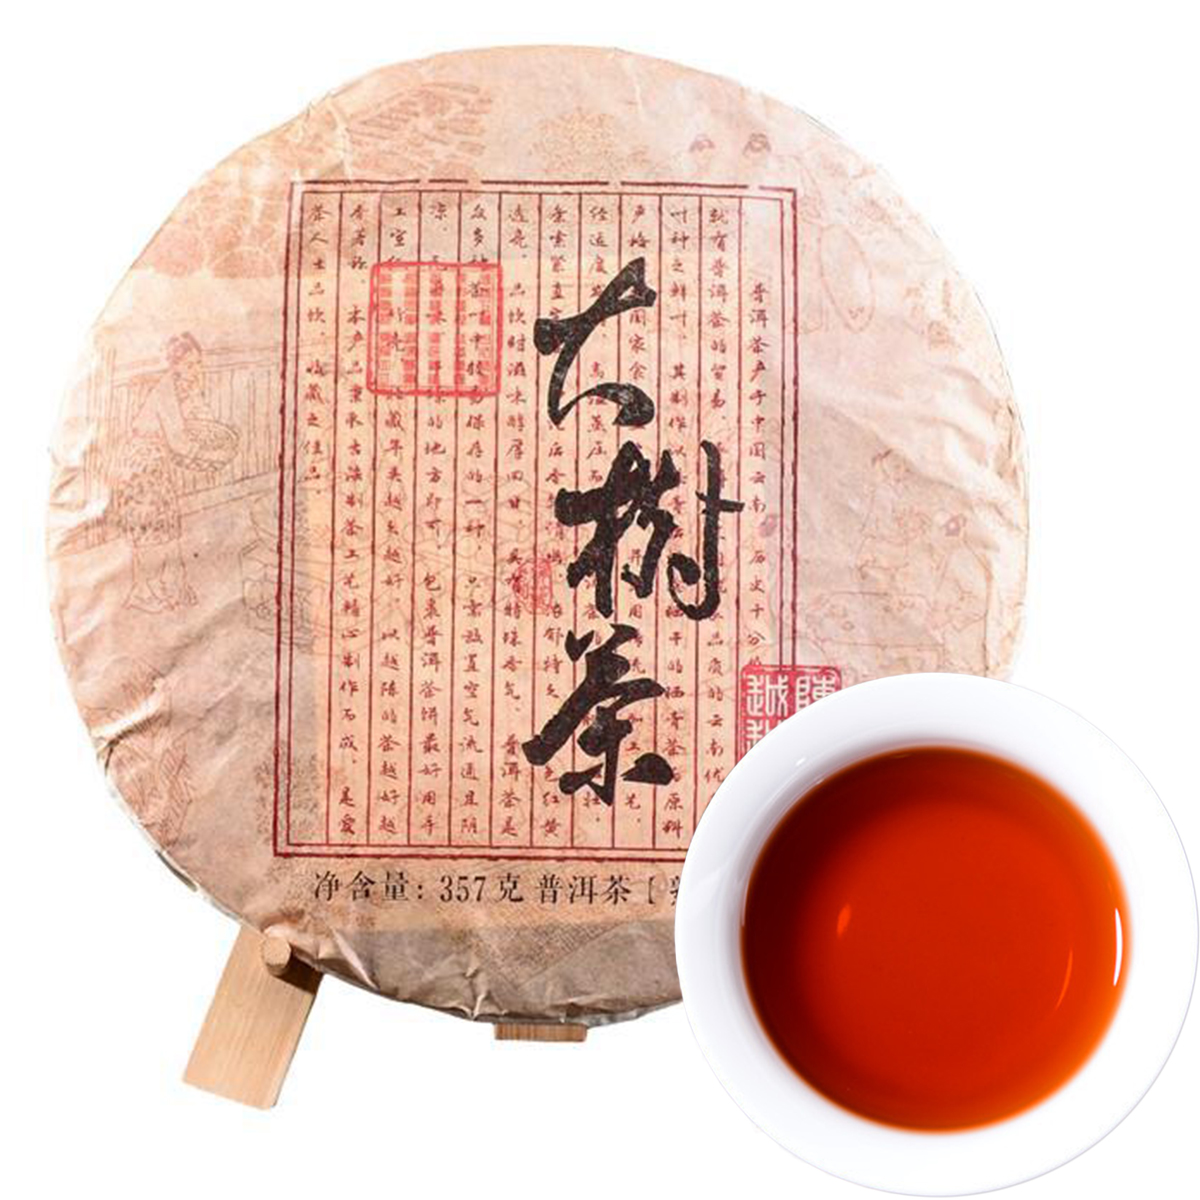 

Hot sales 357g Ripe Puer Tea Yunnan Ancient Fragrance Puer cha Organic Natural Pu'er Oldest Tree Cooked Pu-er Black Puerh Tae Cake